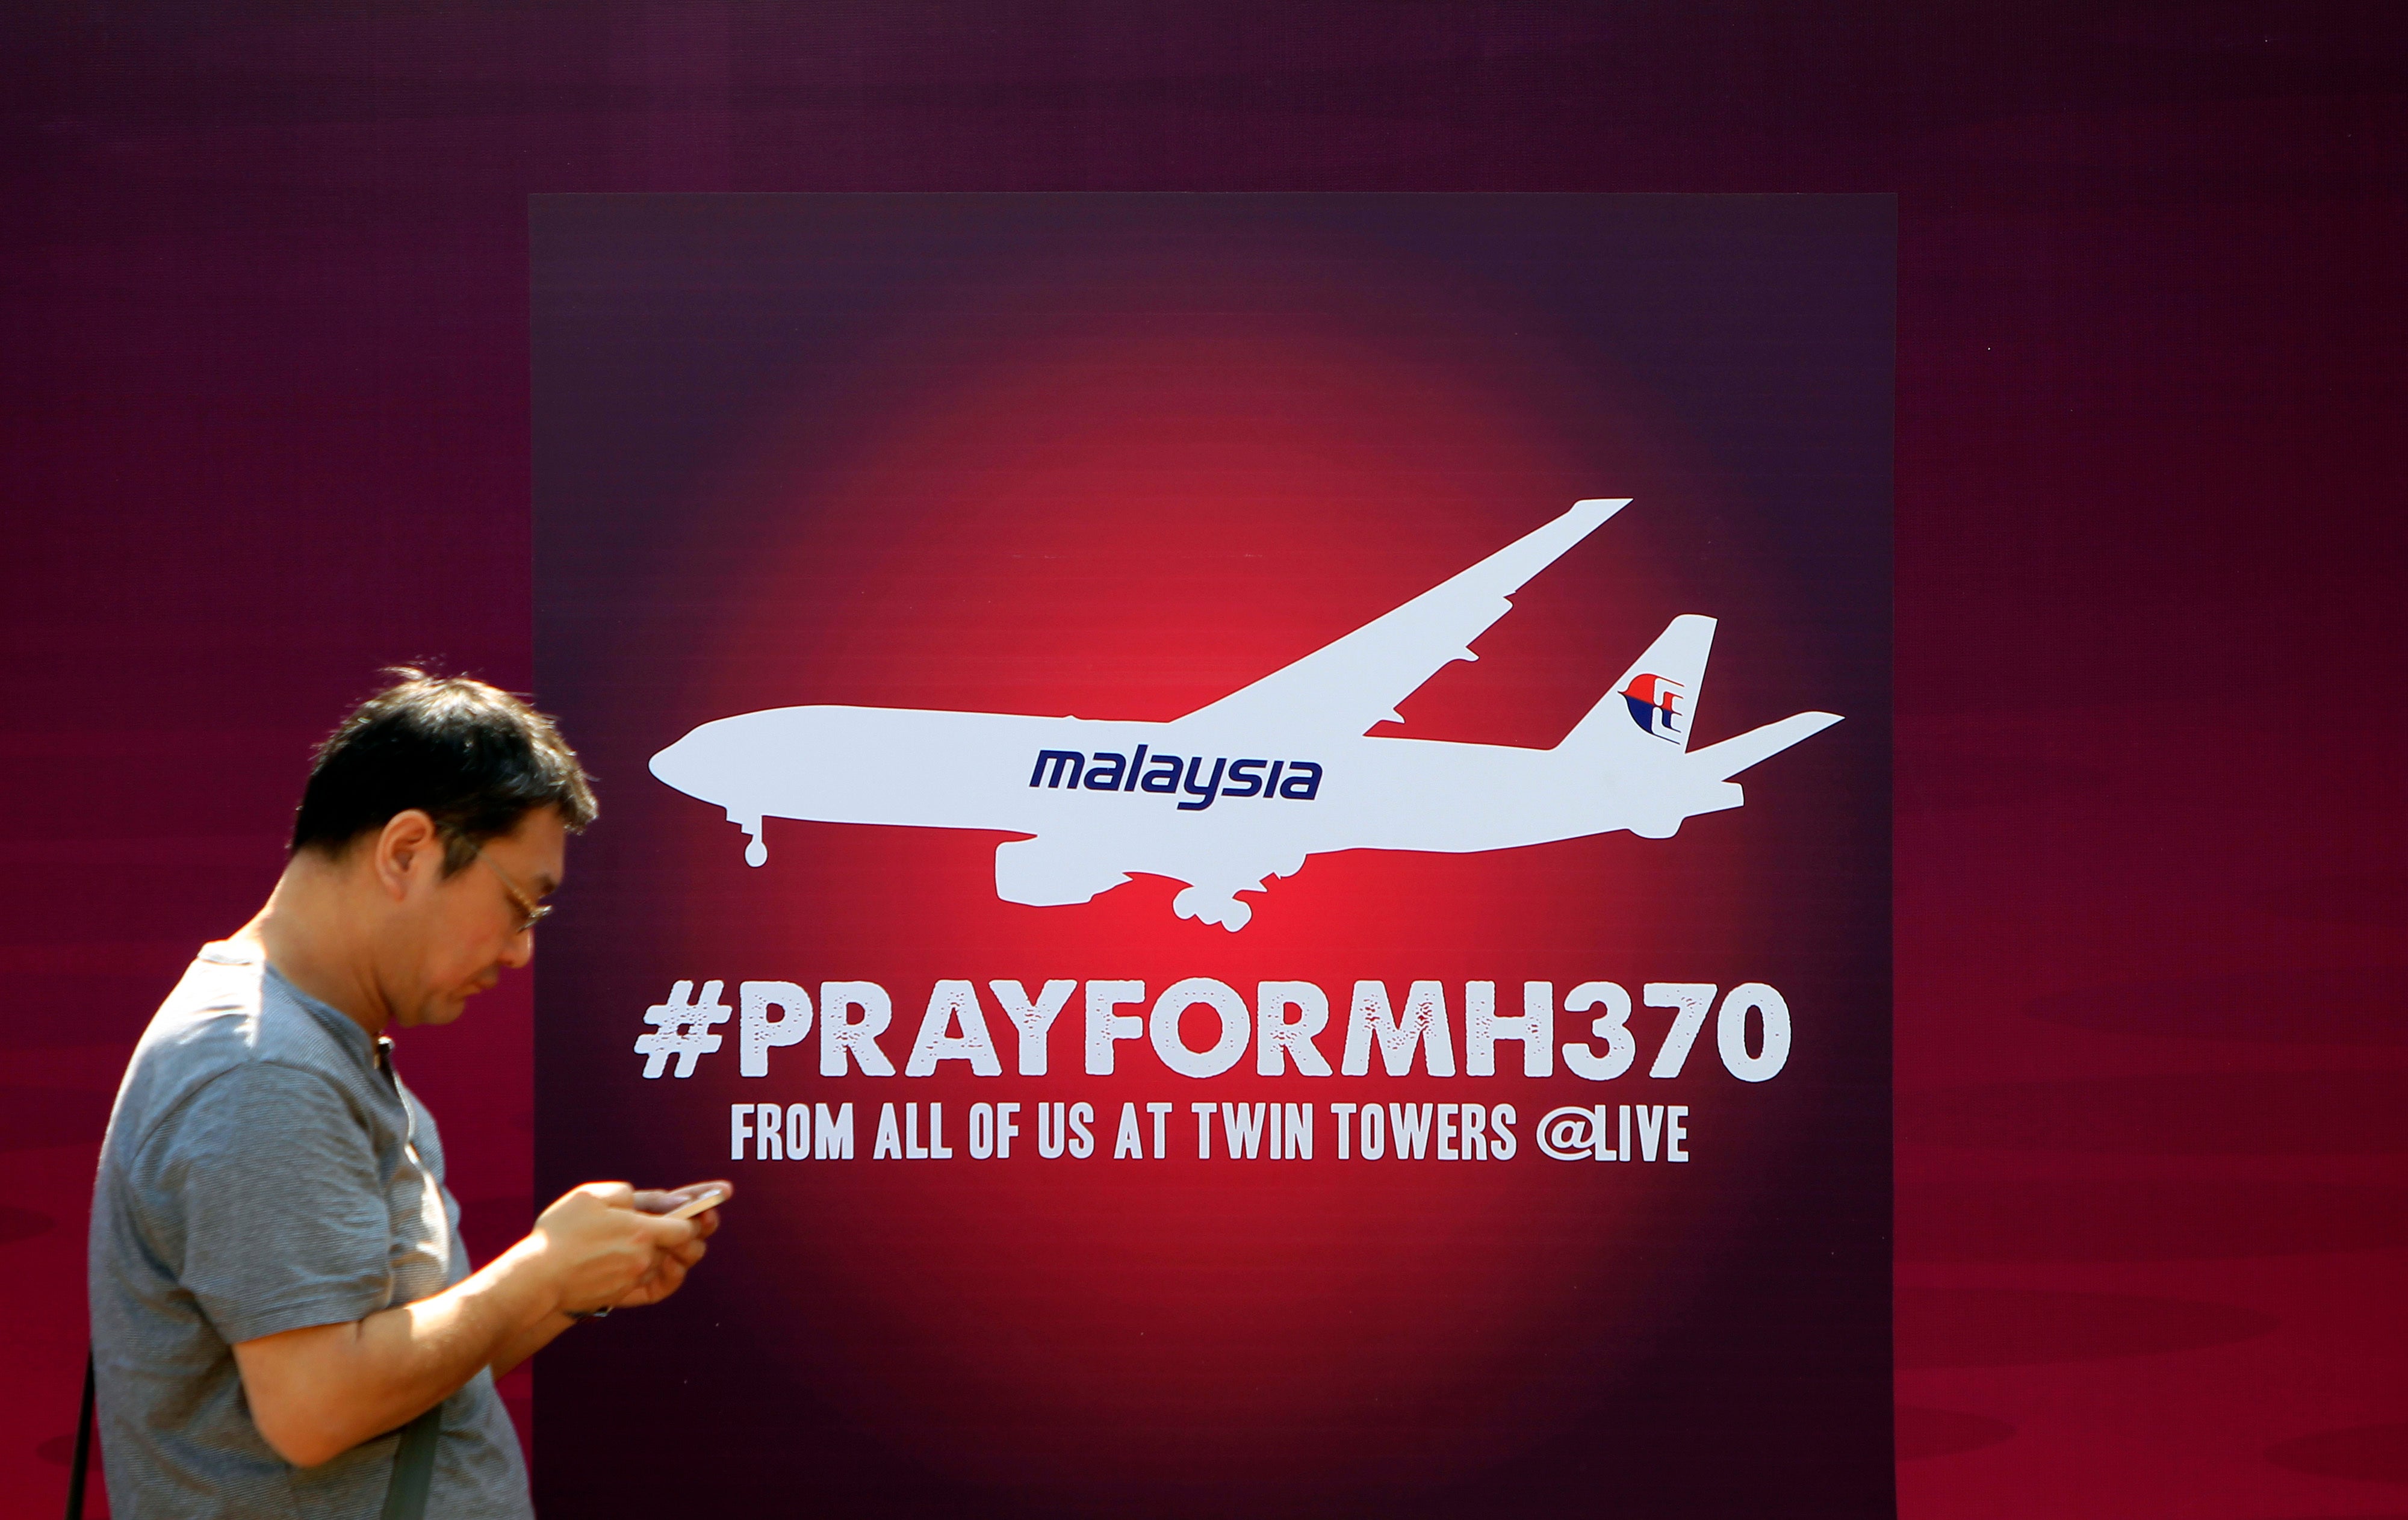 Missing persons: MH370 was lost with 239 passengers and crew on board